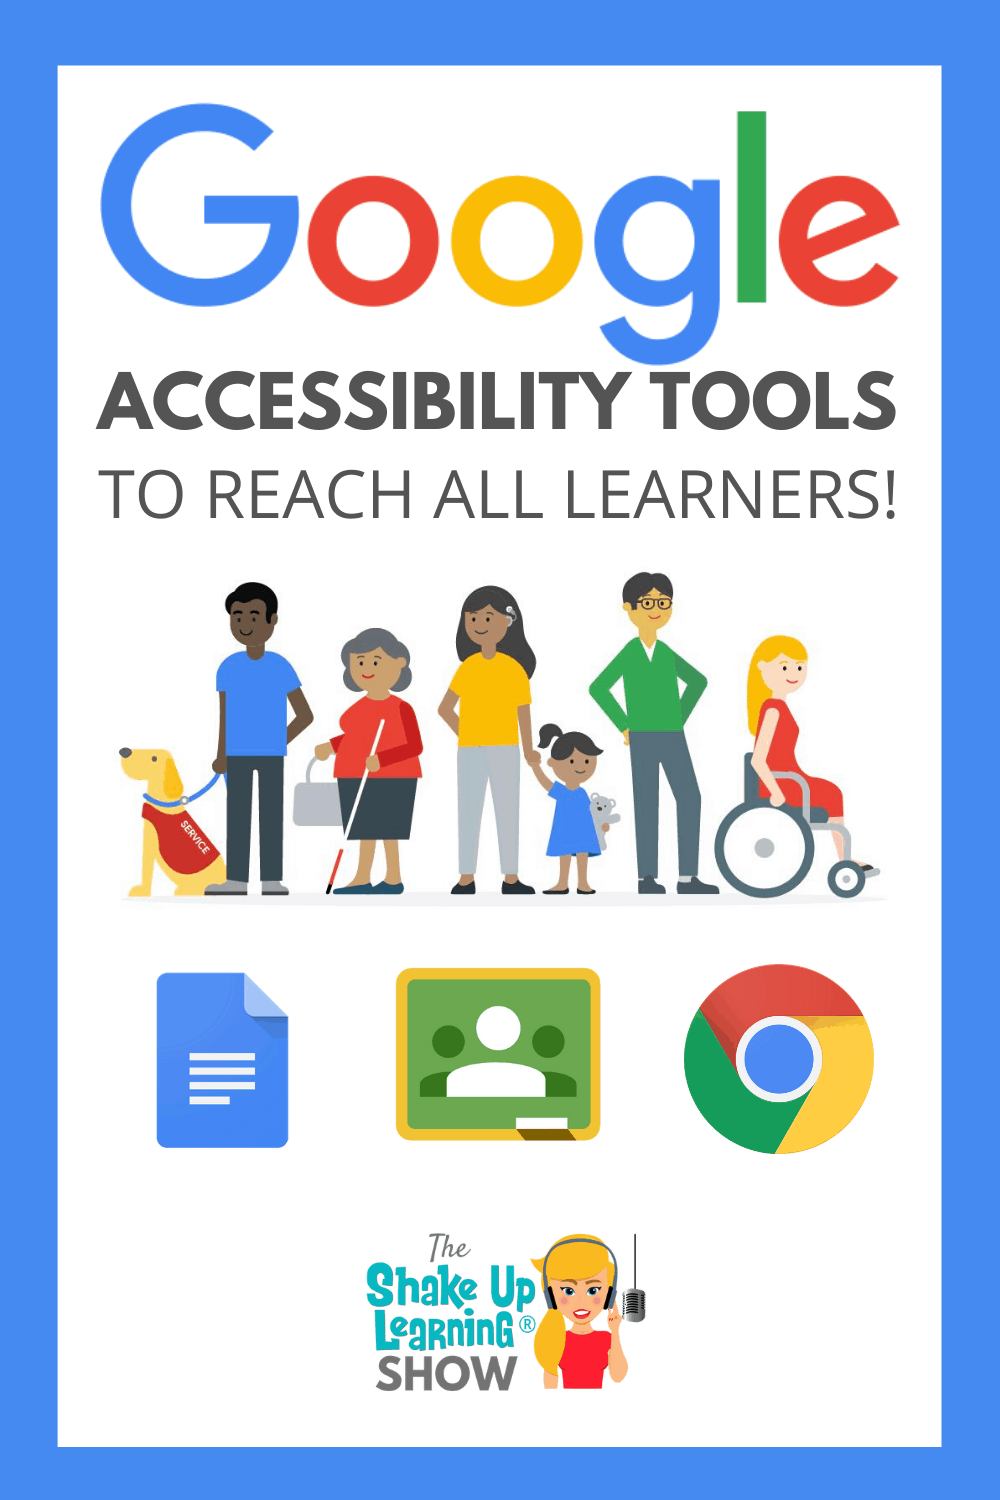 Google Accessibility Tools to Reach ALL Learners - SULS049